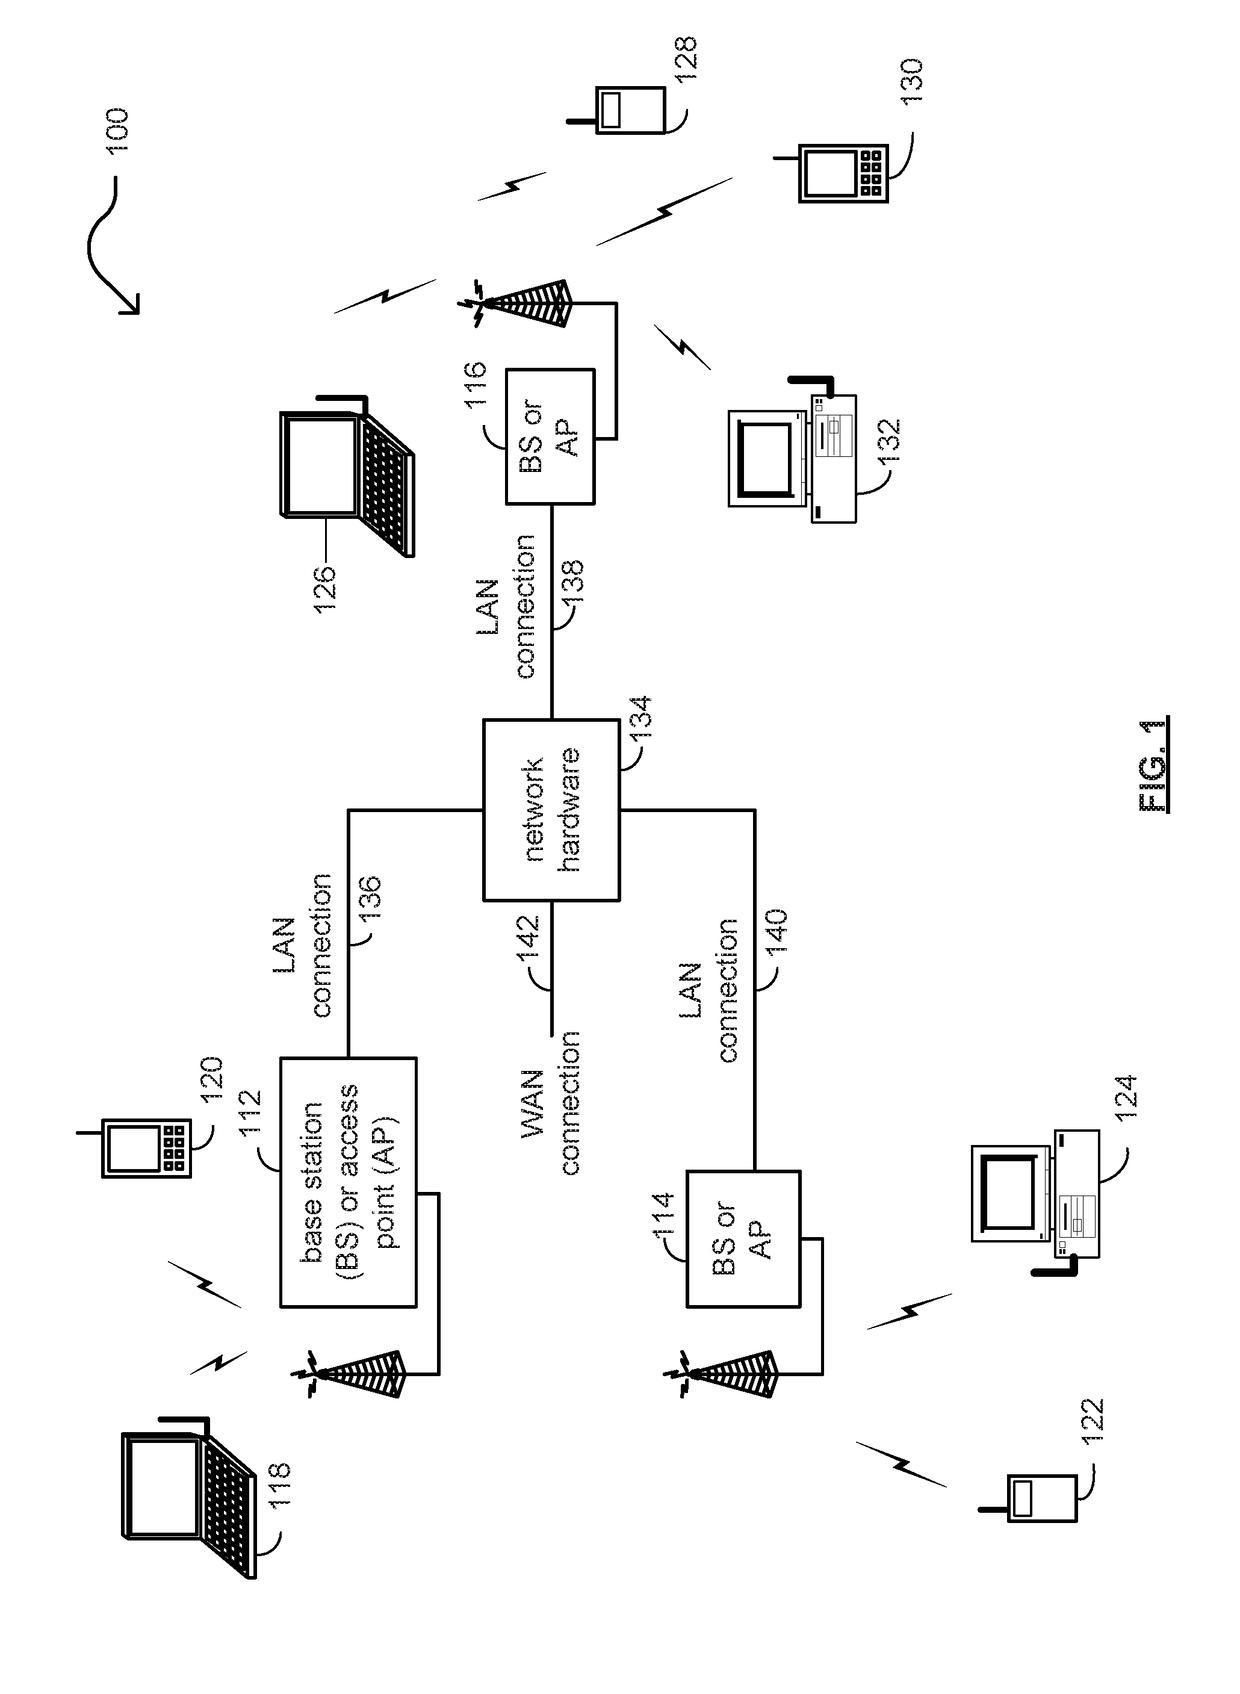 Inter-AP coordination and synchronization within wireless communications